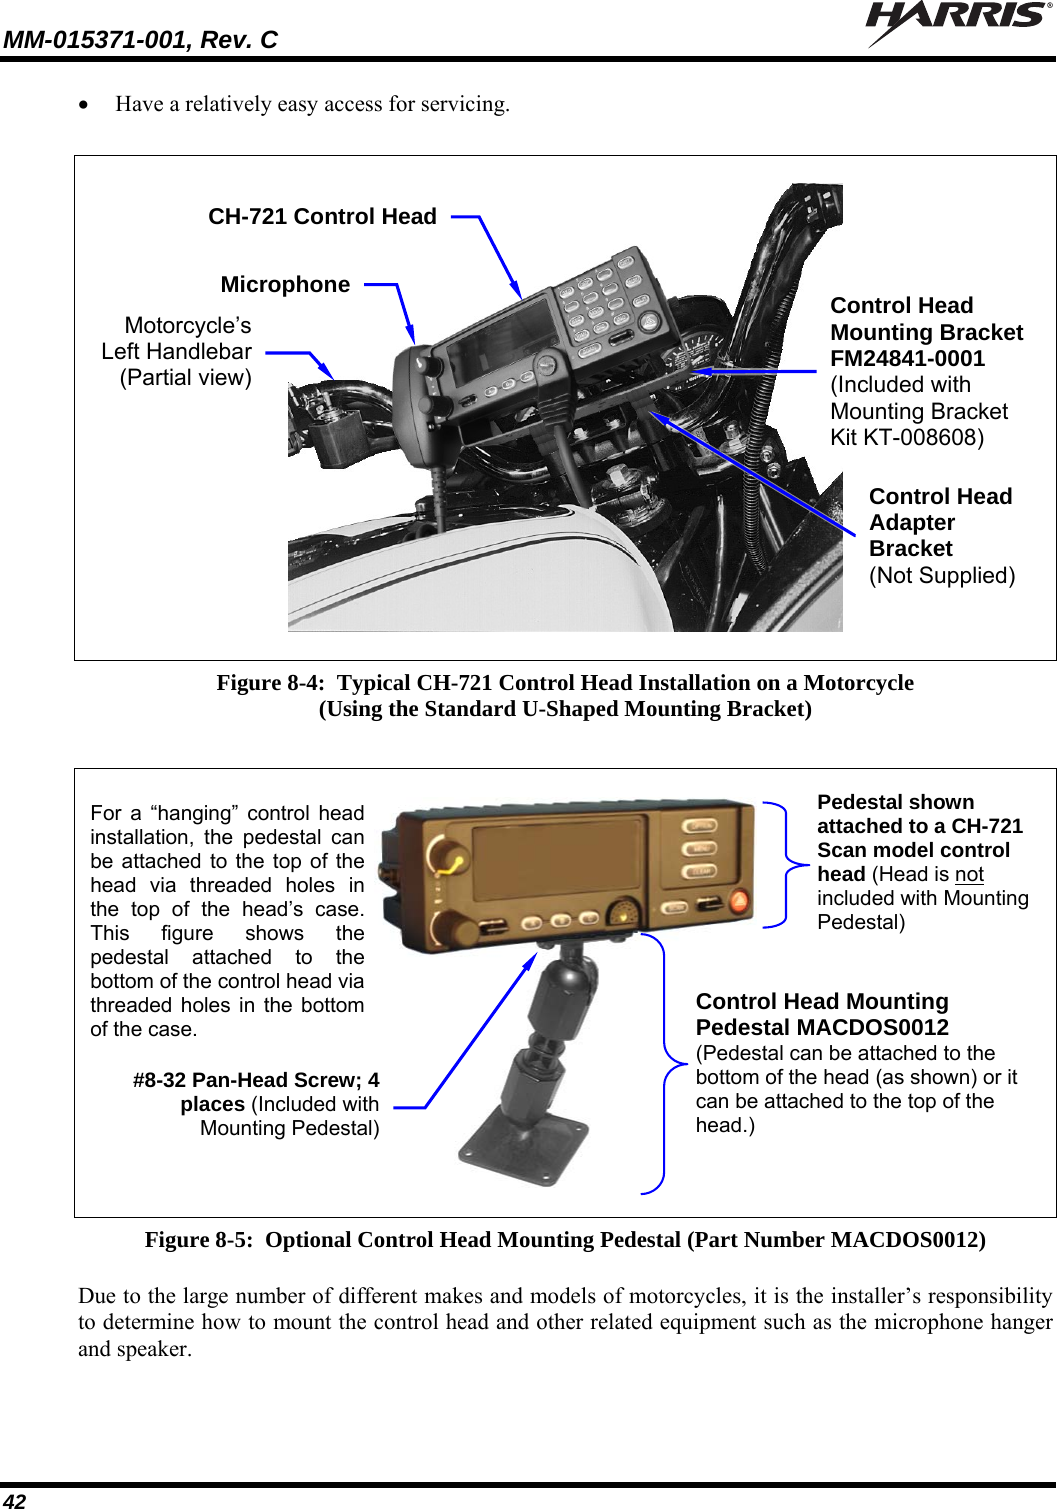 MM-015371-001, Rev. C   42  Have a relatively easy access for servicing.    Figure 8-4:  Typical CH-721 Control Head Installation on a Motorcycle (Using the Standard U-Shaped Mounting Bracket)    Figure 8-5:  Optional Control Head Mounting Pedestal (Part Number MACDOS0012)  Due to the large number of different makes and models of motorcycles, it is the installer’s responsibility to determine how to mount the control head and other related equipment such as the microphone hanger and speaker. CH-721 Control HeadMicrophoneMotorcycle’s Left Handlebar(Partial view)Control Head Adapter Bracket (Not Supplied) Control Head Mounting Bracket FM24841-0001 (Included with Mounting Bracket Kit KT-008608) Control Head Mounting Pedestal MACDOS0012 (Pedestal can be attached to the bottom of the head (as shown) or it can be attached to the top of the head.) Pedestal shown attached to a CH-721 Scan model control head (Head is not included with Mounting Pedestal) #8-32 Pan-Head Screw; 4places (Included withMounting Pedestal)For a “hanging” control headinstallation, the pedestal canbe attached to the top of thehead via threaded holes inthe top of the head’s case.This figure shows thepedestal attached to thebottom of the control head viathreaded holes in the bottomof the case. 